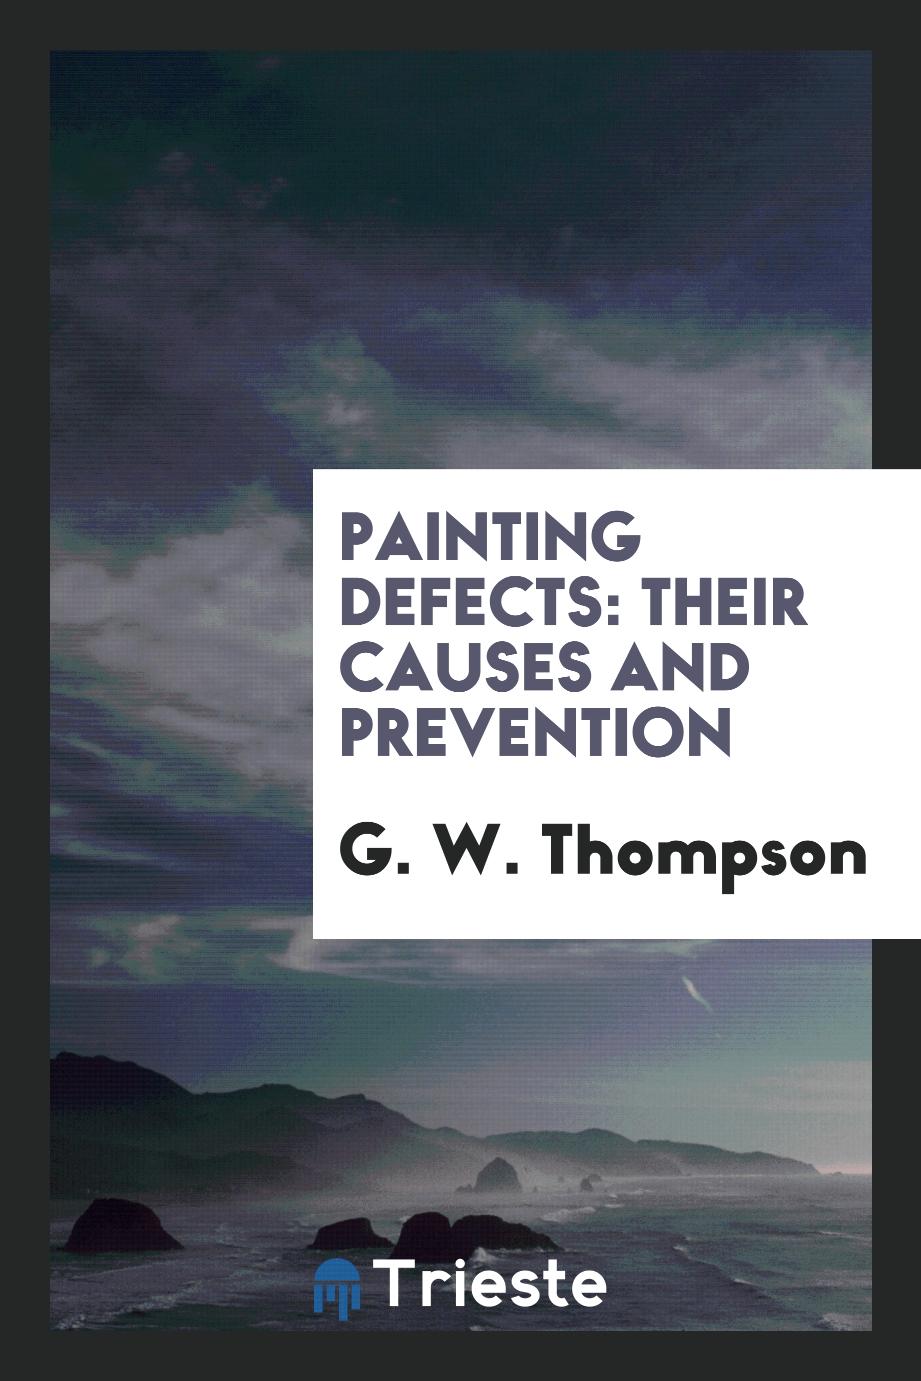 Painting Defects: Their Causes and Prevention